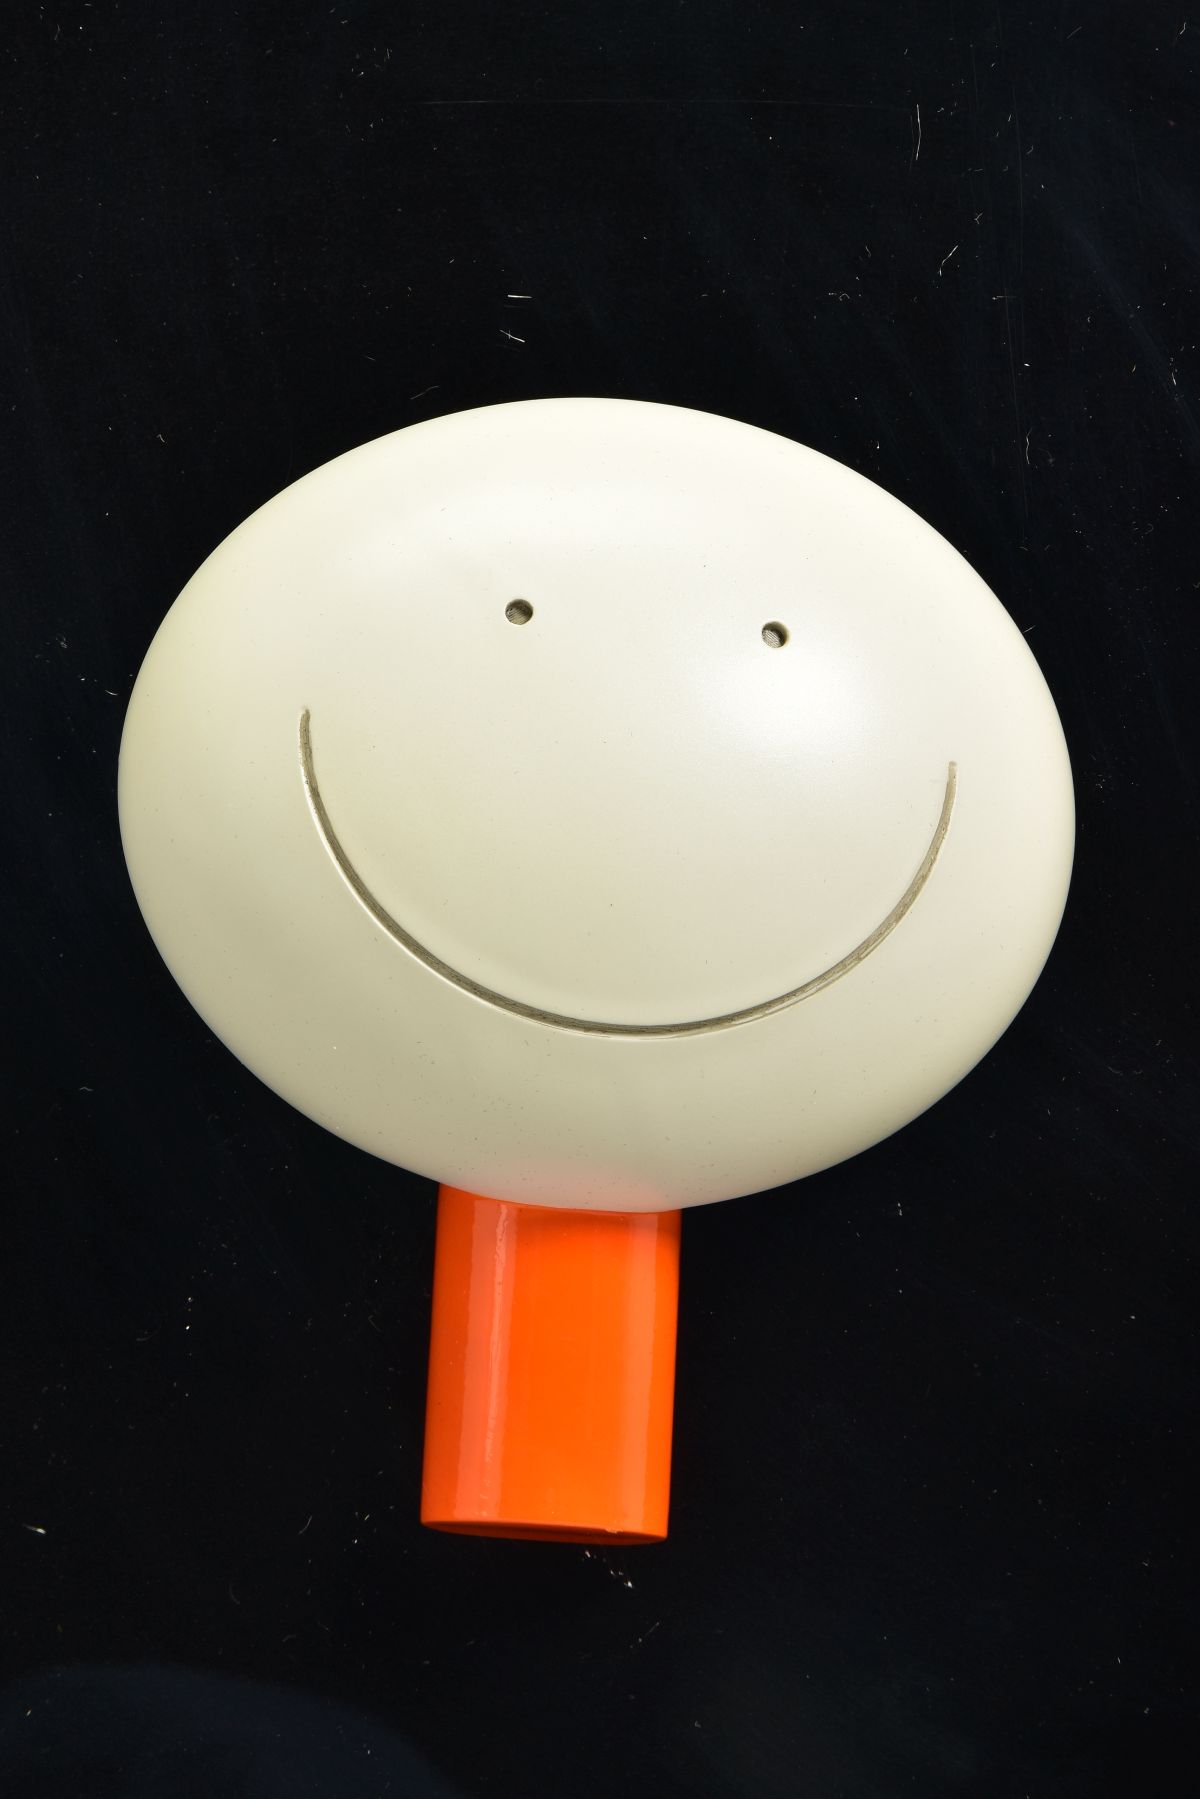 DOUG HYDE (BRITISH 1972) 'THE SMILE', a limited edition sculpture of a smiling face mounted within a - Image 2 of 4